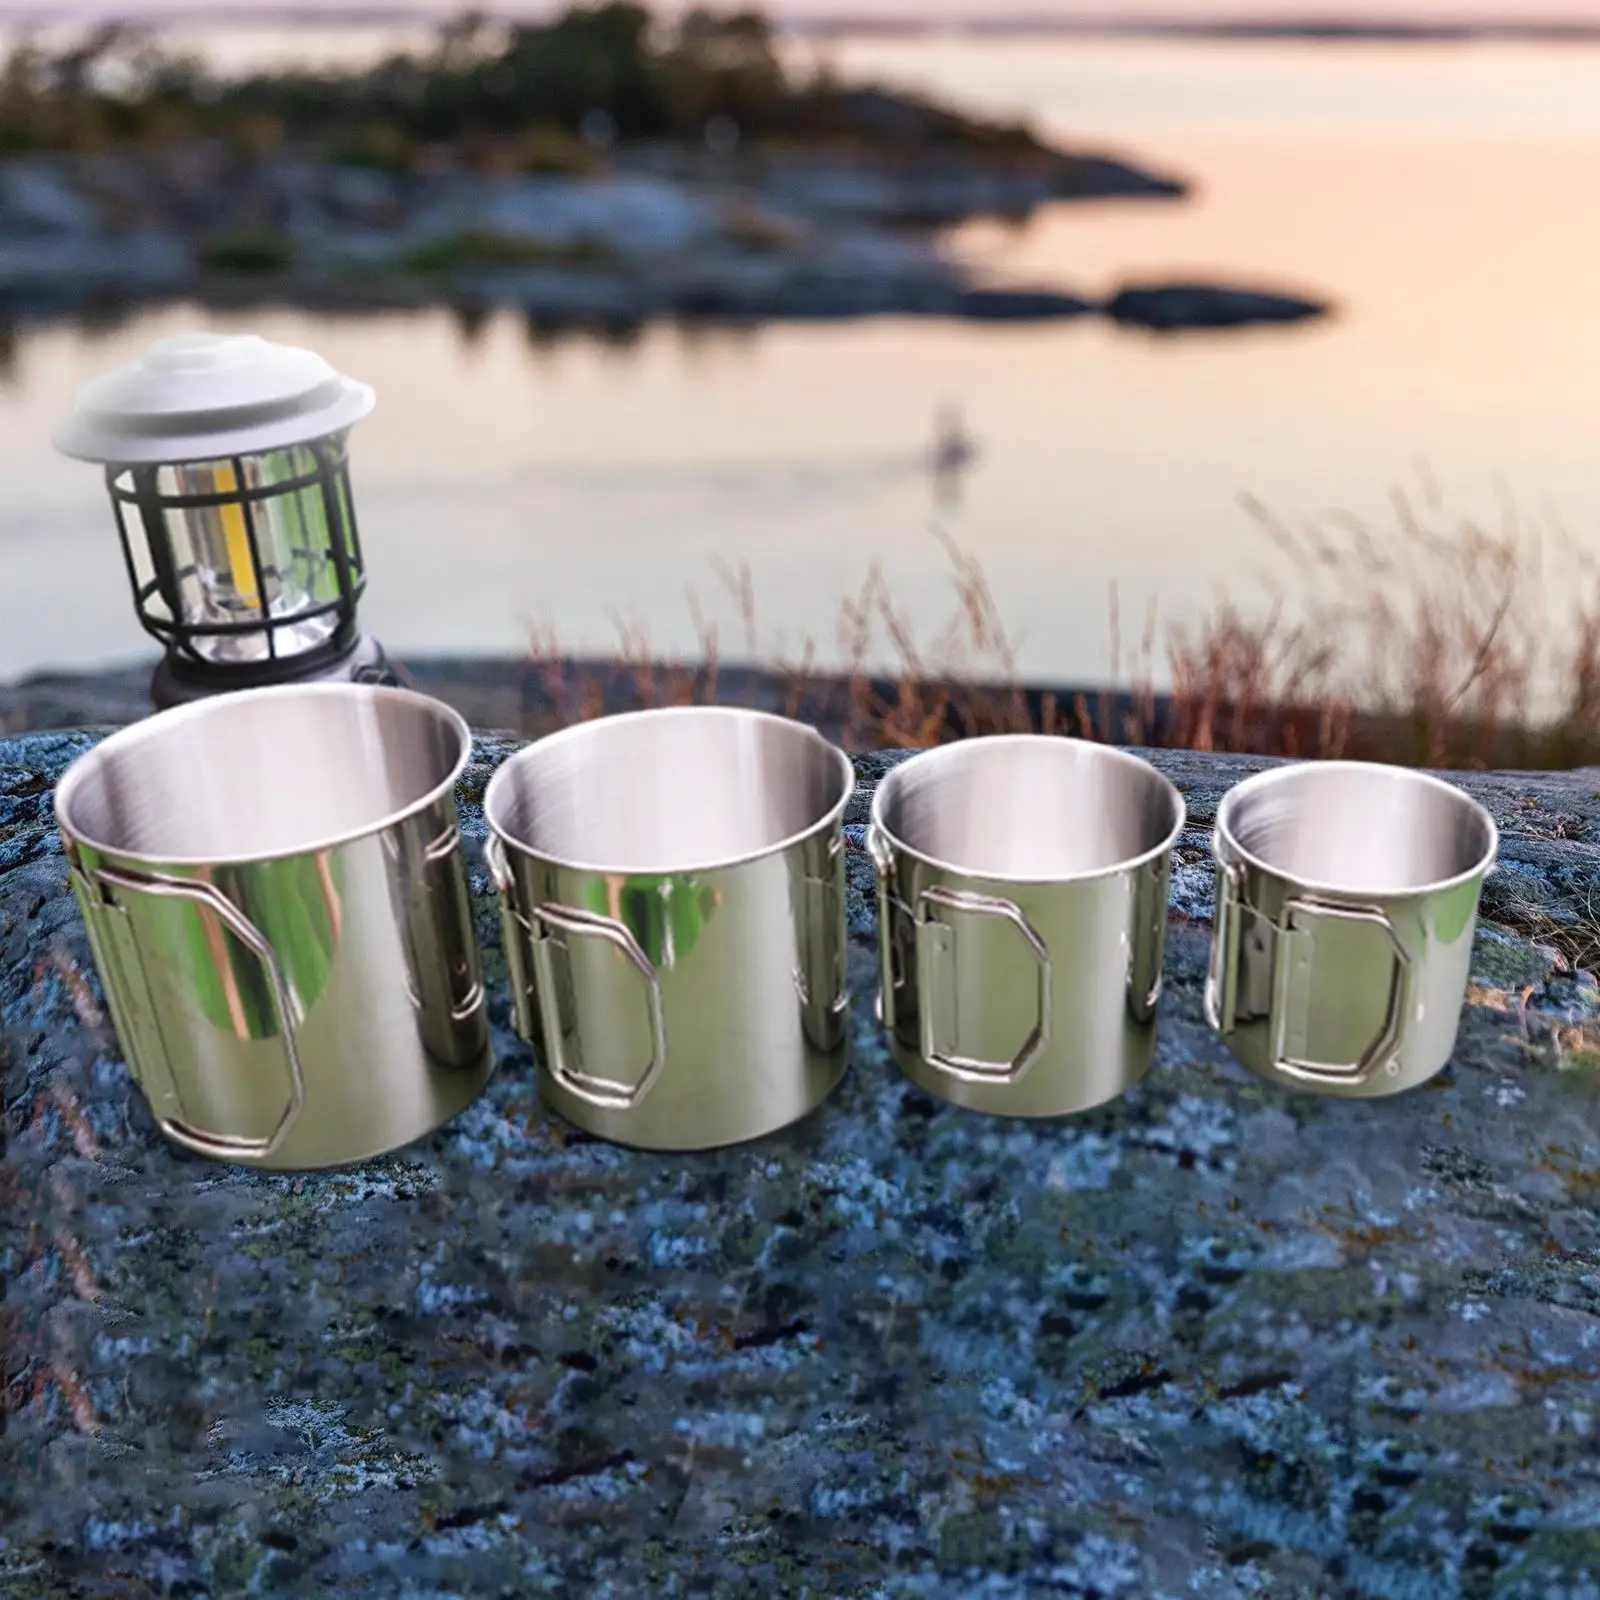 4x Camping Mug Lightweight Stainless Steel Bottle for Boating Hiking Picnics